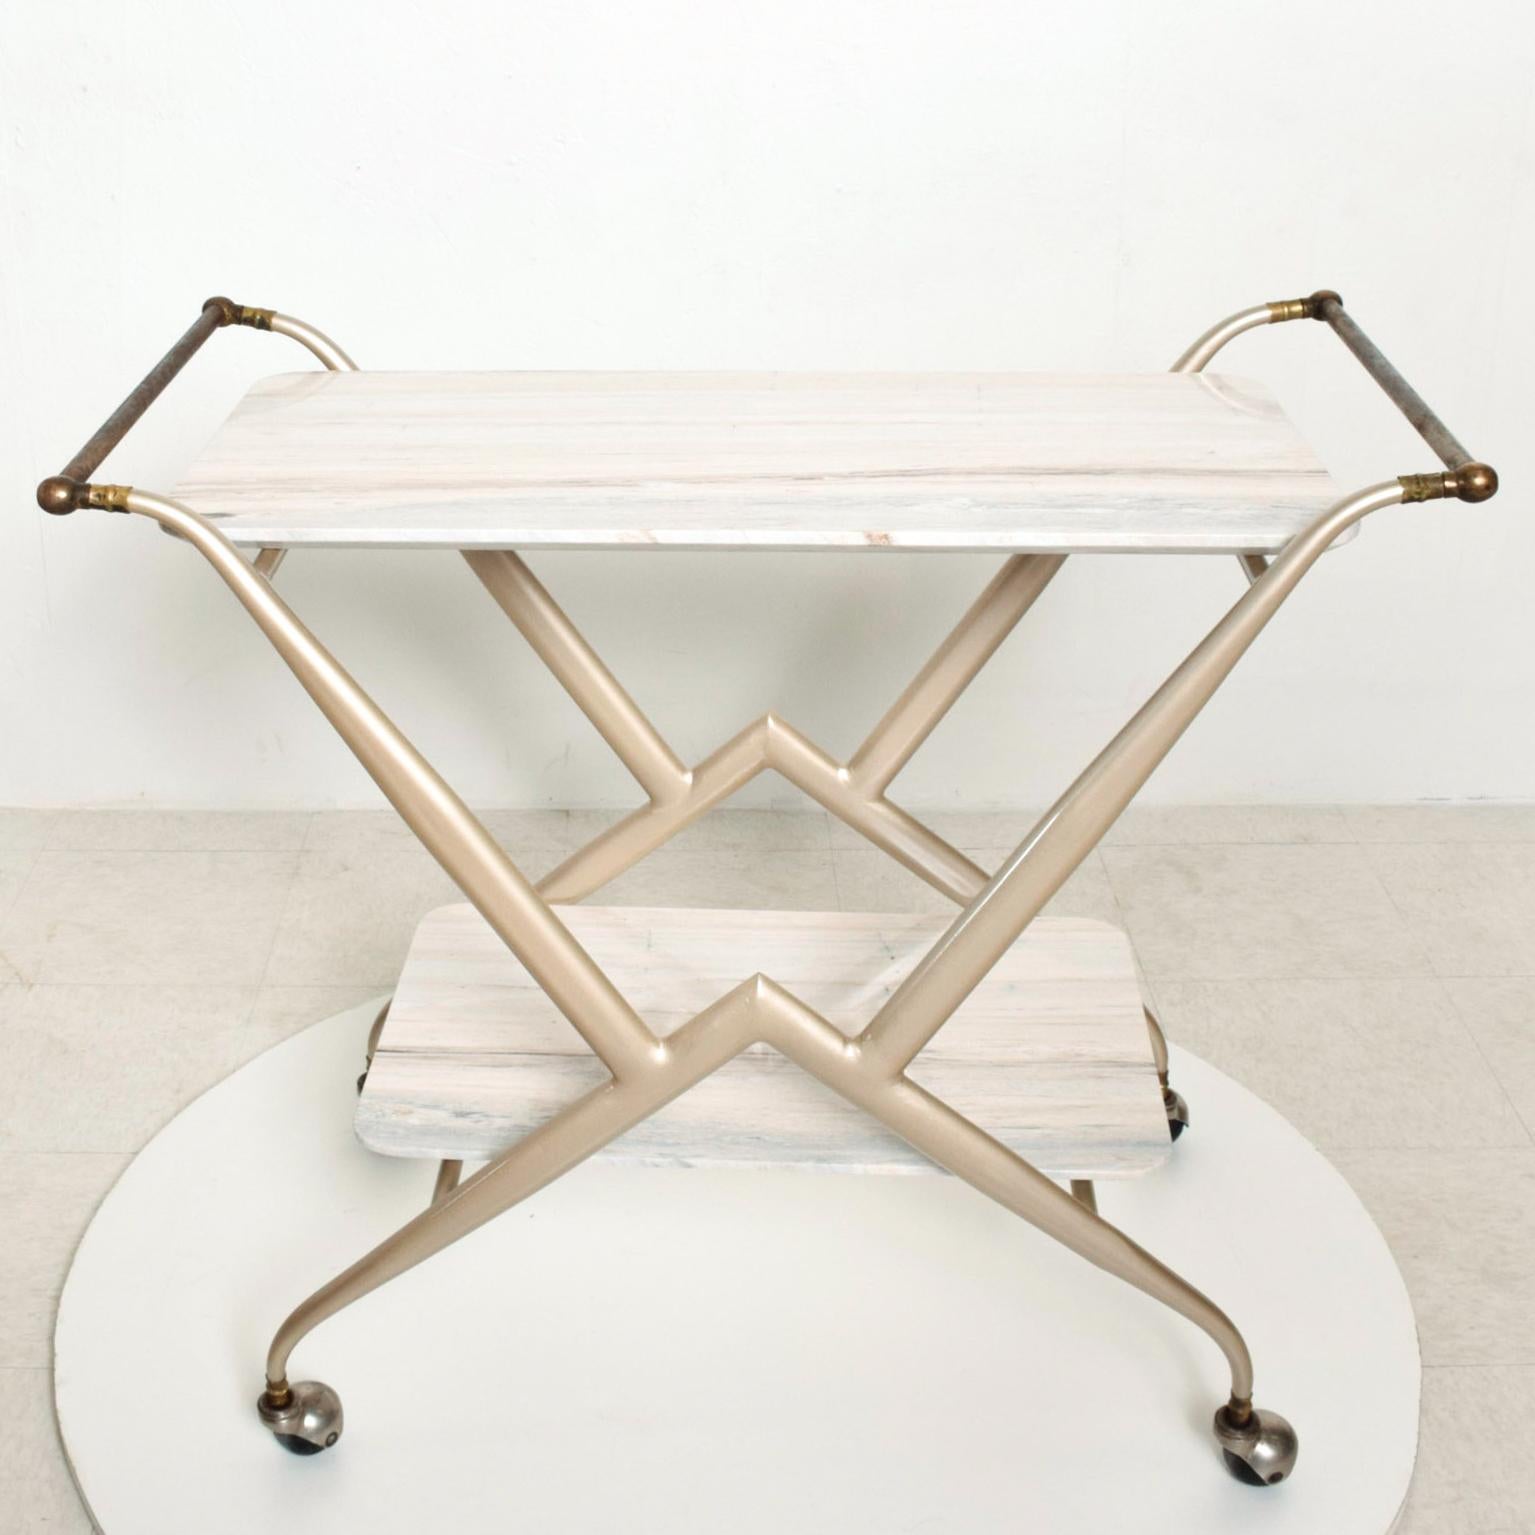 Dazzling Service Cart Frosted Pink White Marble and Patinated Brass Mexico 1960s
Attribution to Arturo Pani. Unmarked.
Featured in CASA DEL PEDREGAL in Mexico designed 1962 
by Mexican Architect Eduardo Saad Eljure.
Ideal as Bar Cart Liquor Tea